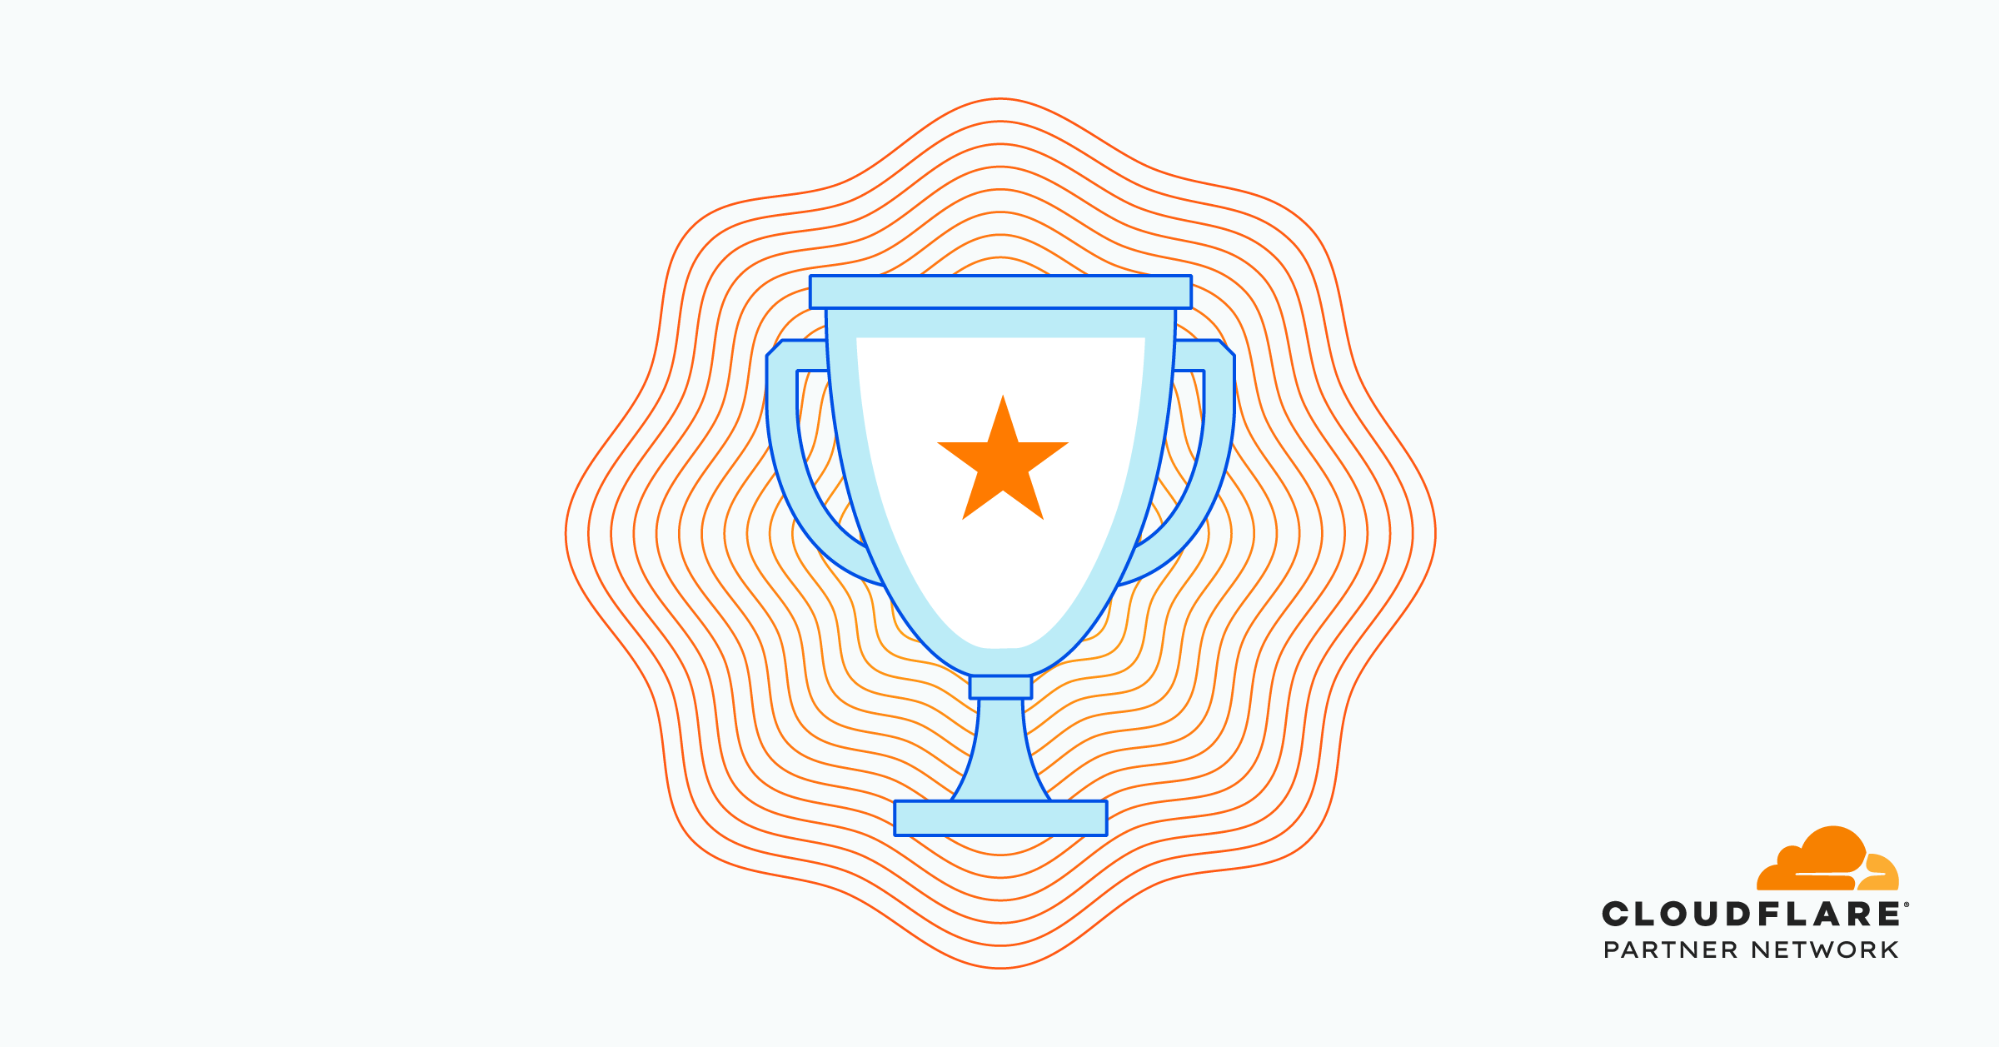 Congratulations to Cloudflare’s 2020 Partner Award Winners